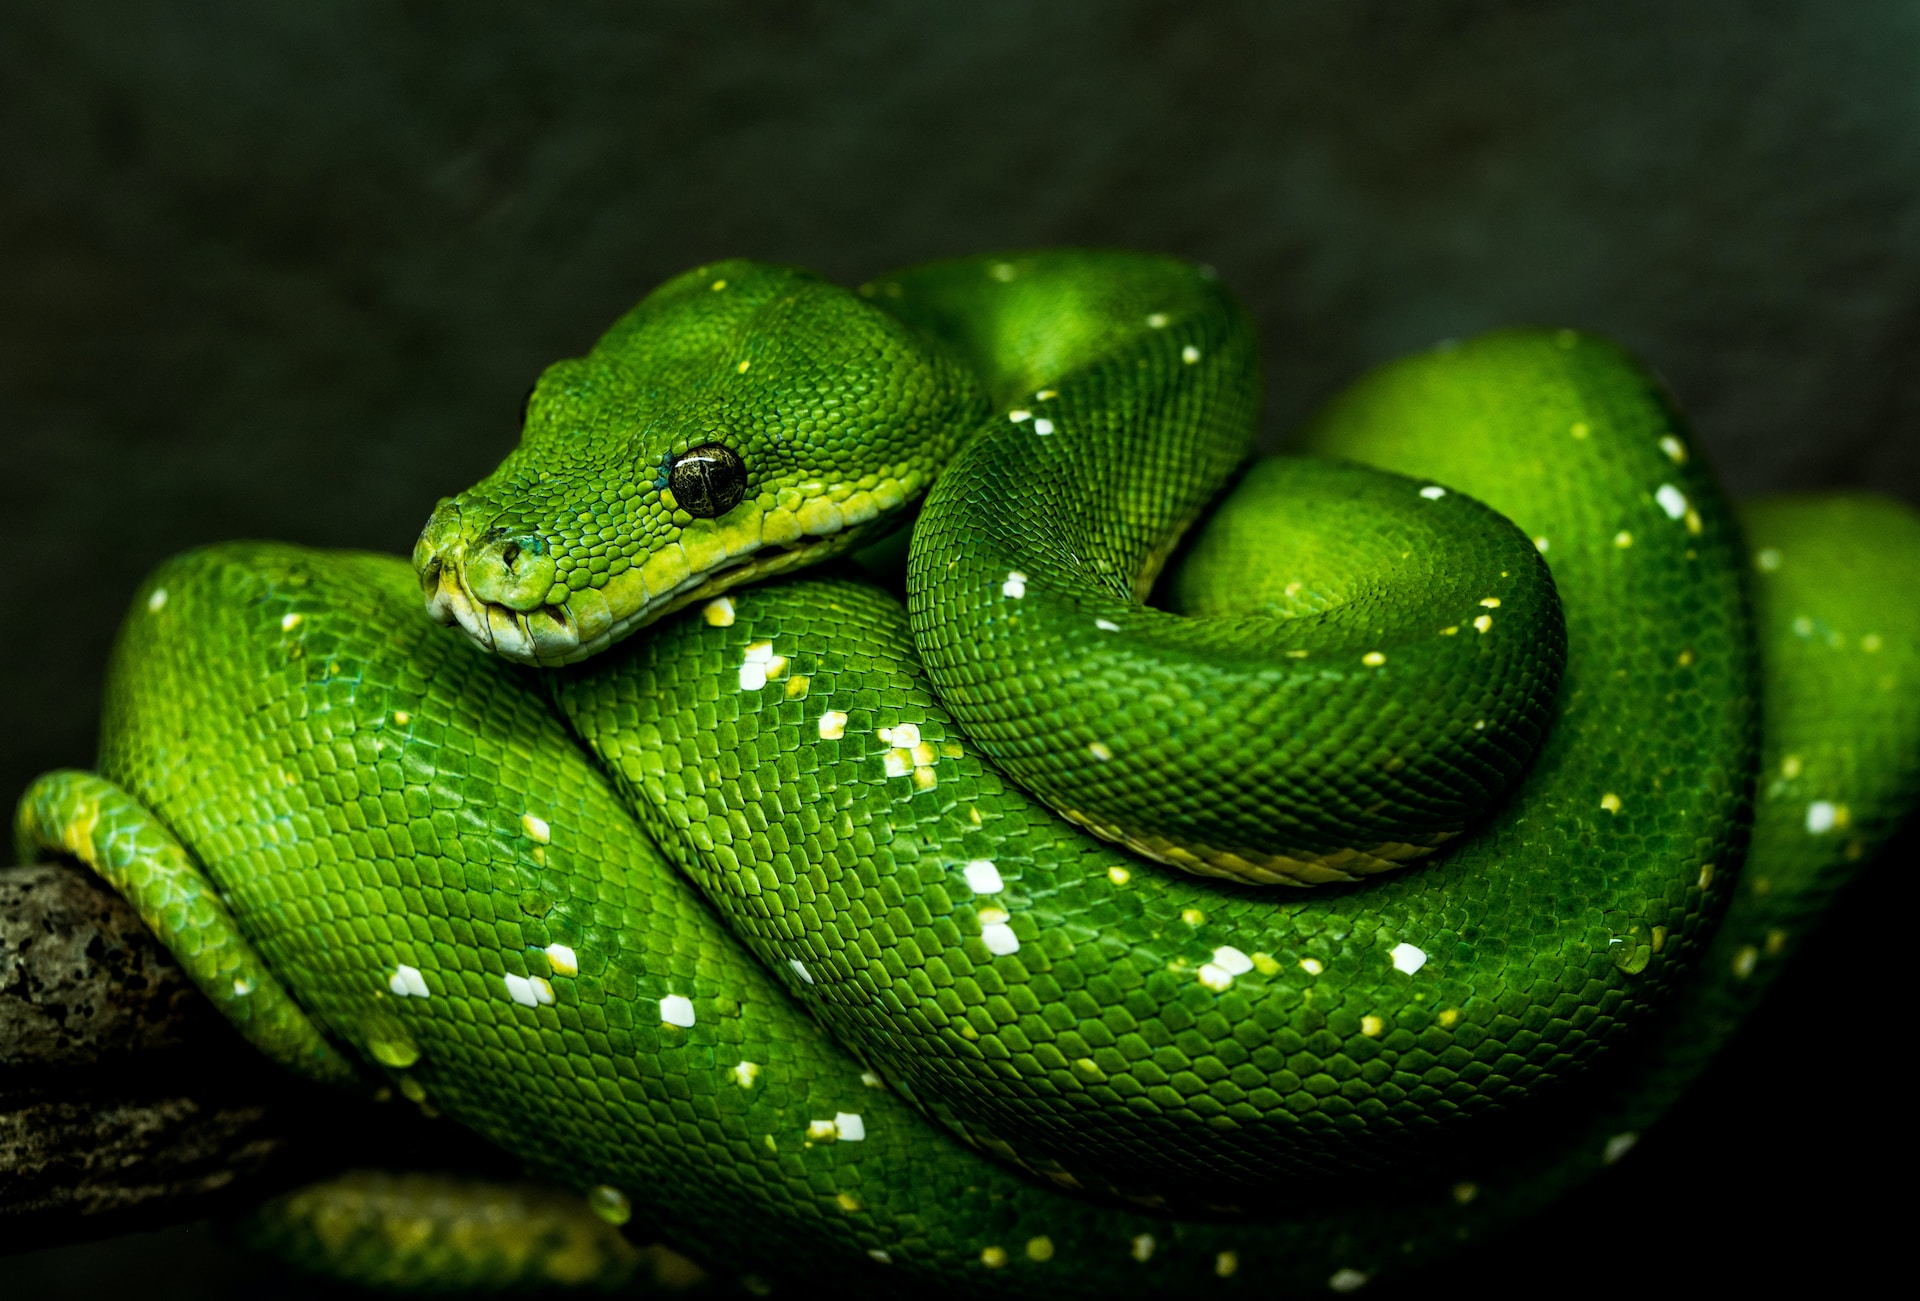 Top 10 Interesting Facts About Snakes You Never Knew